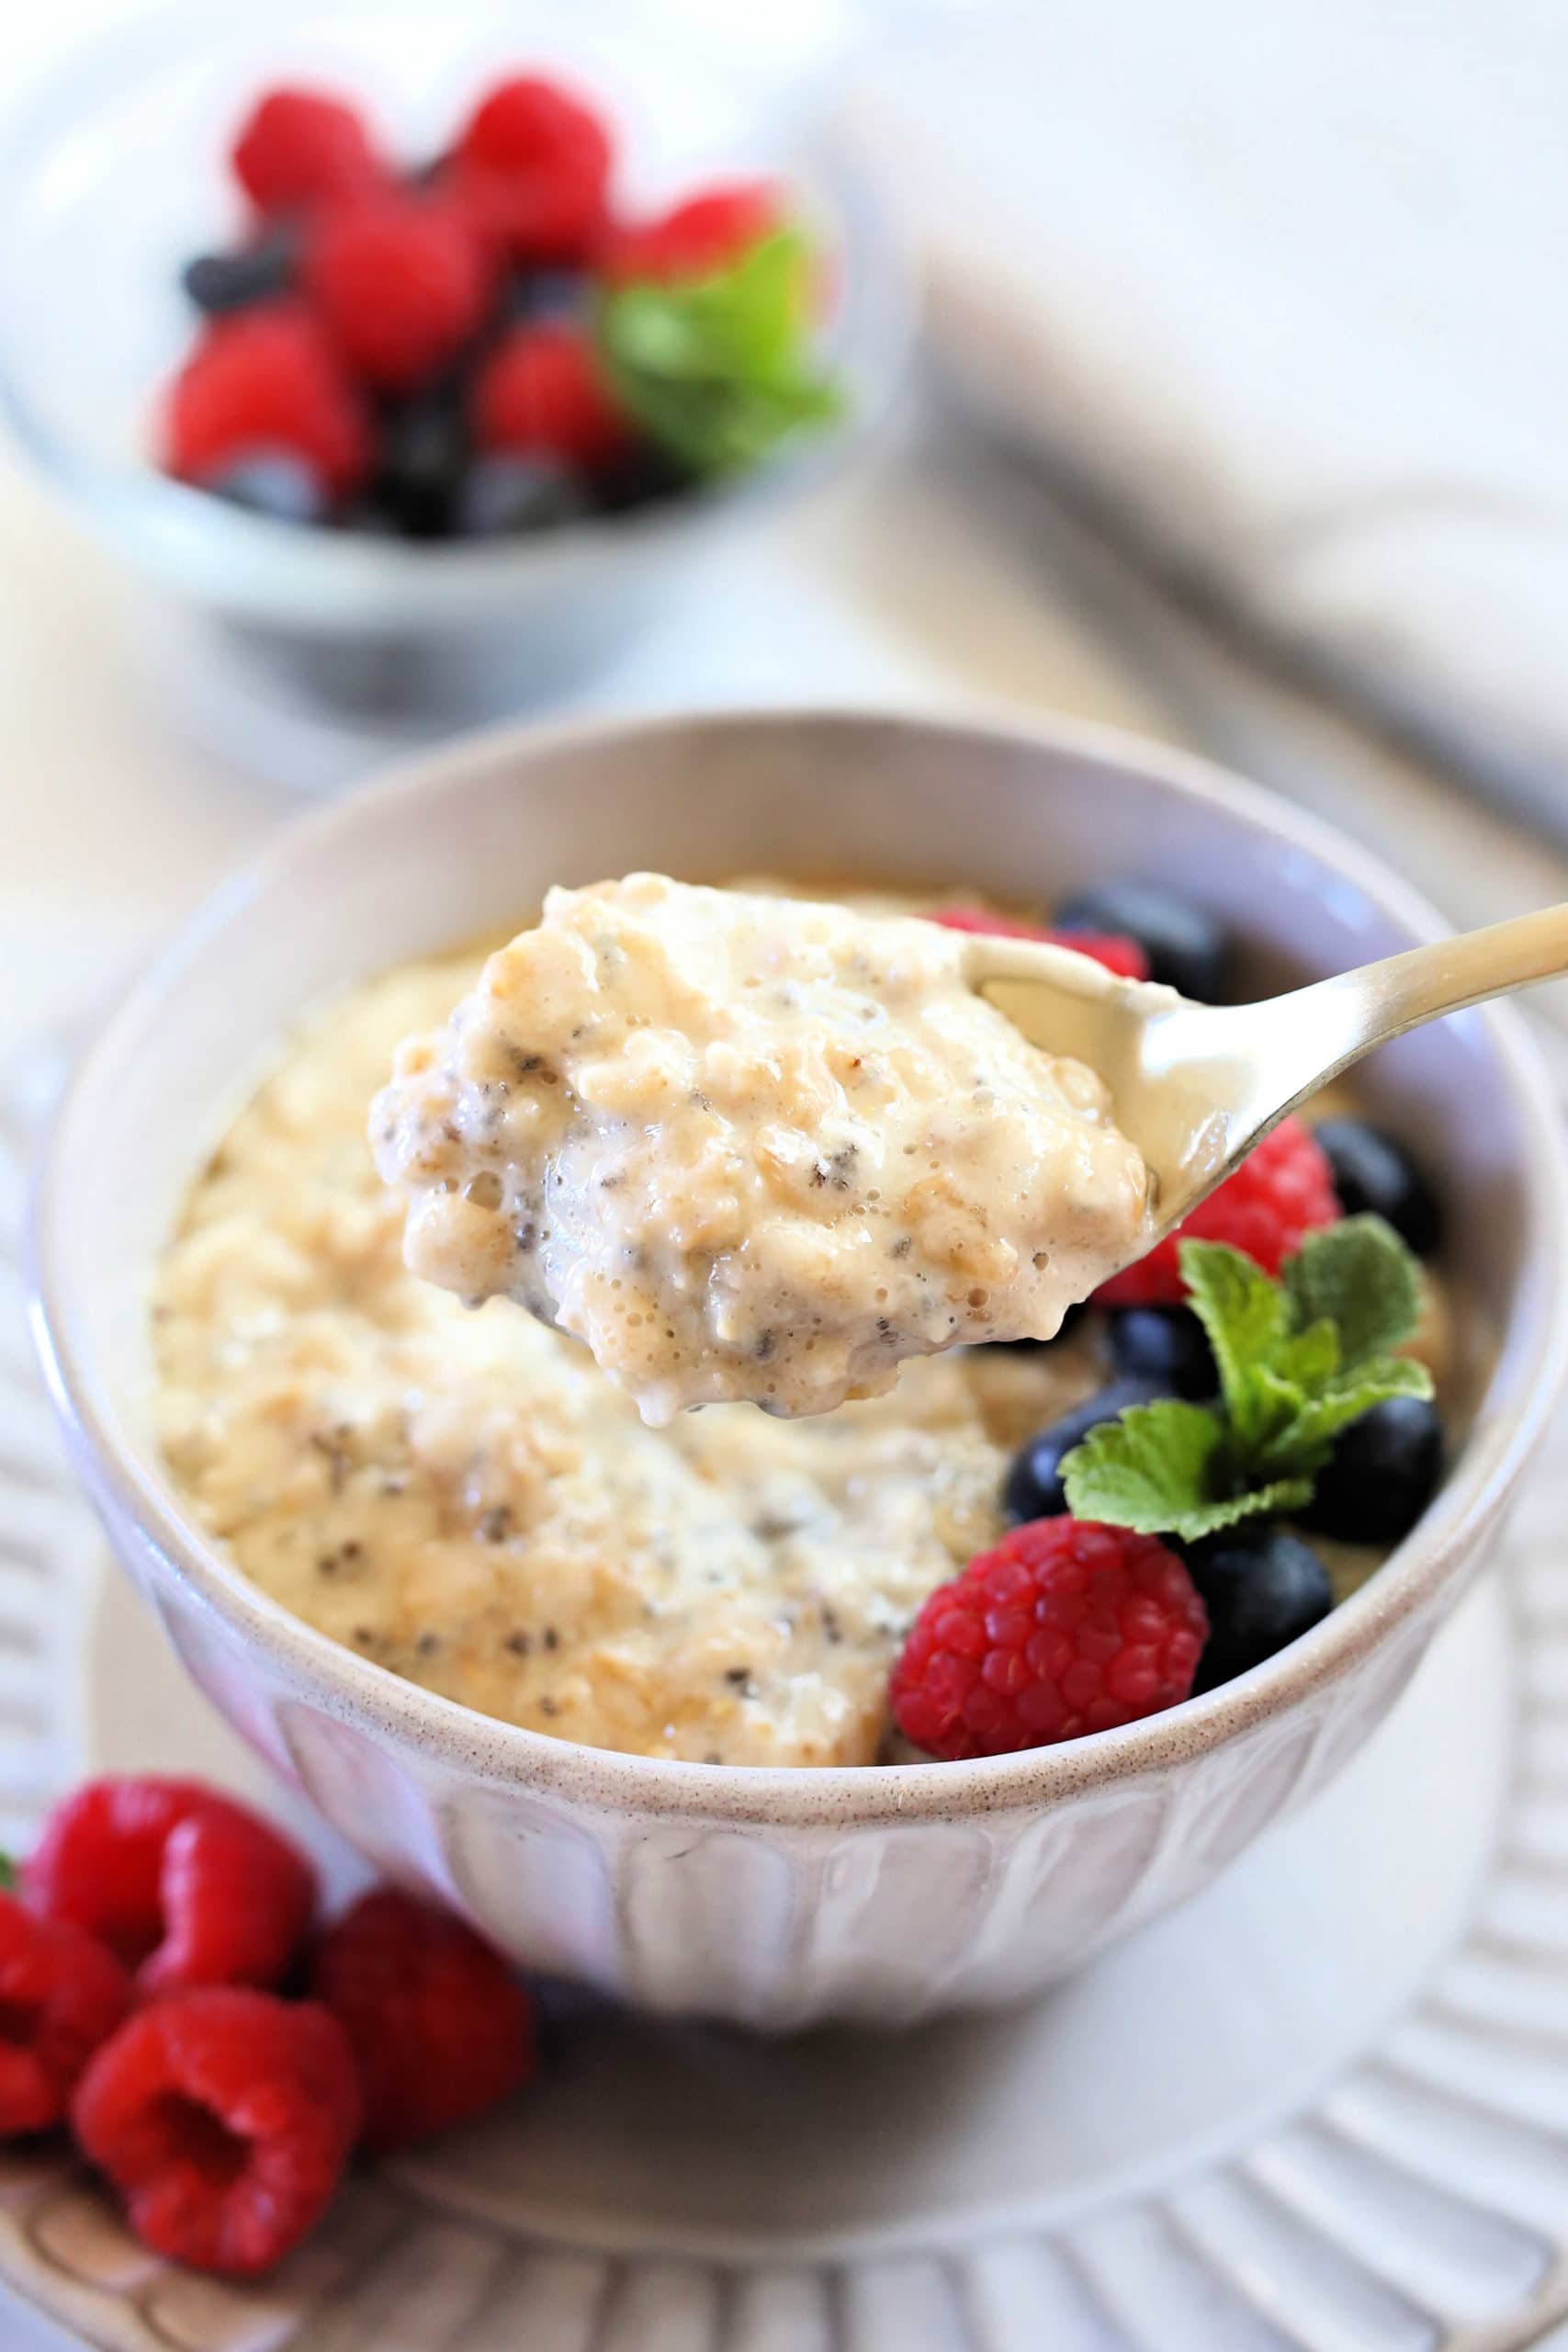 gluten free oatmeal recipe made with protein on a spoon scooped from a breakfast bowl